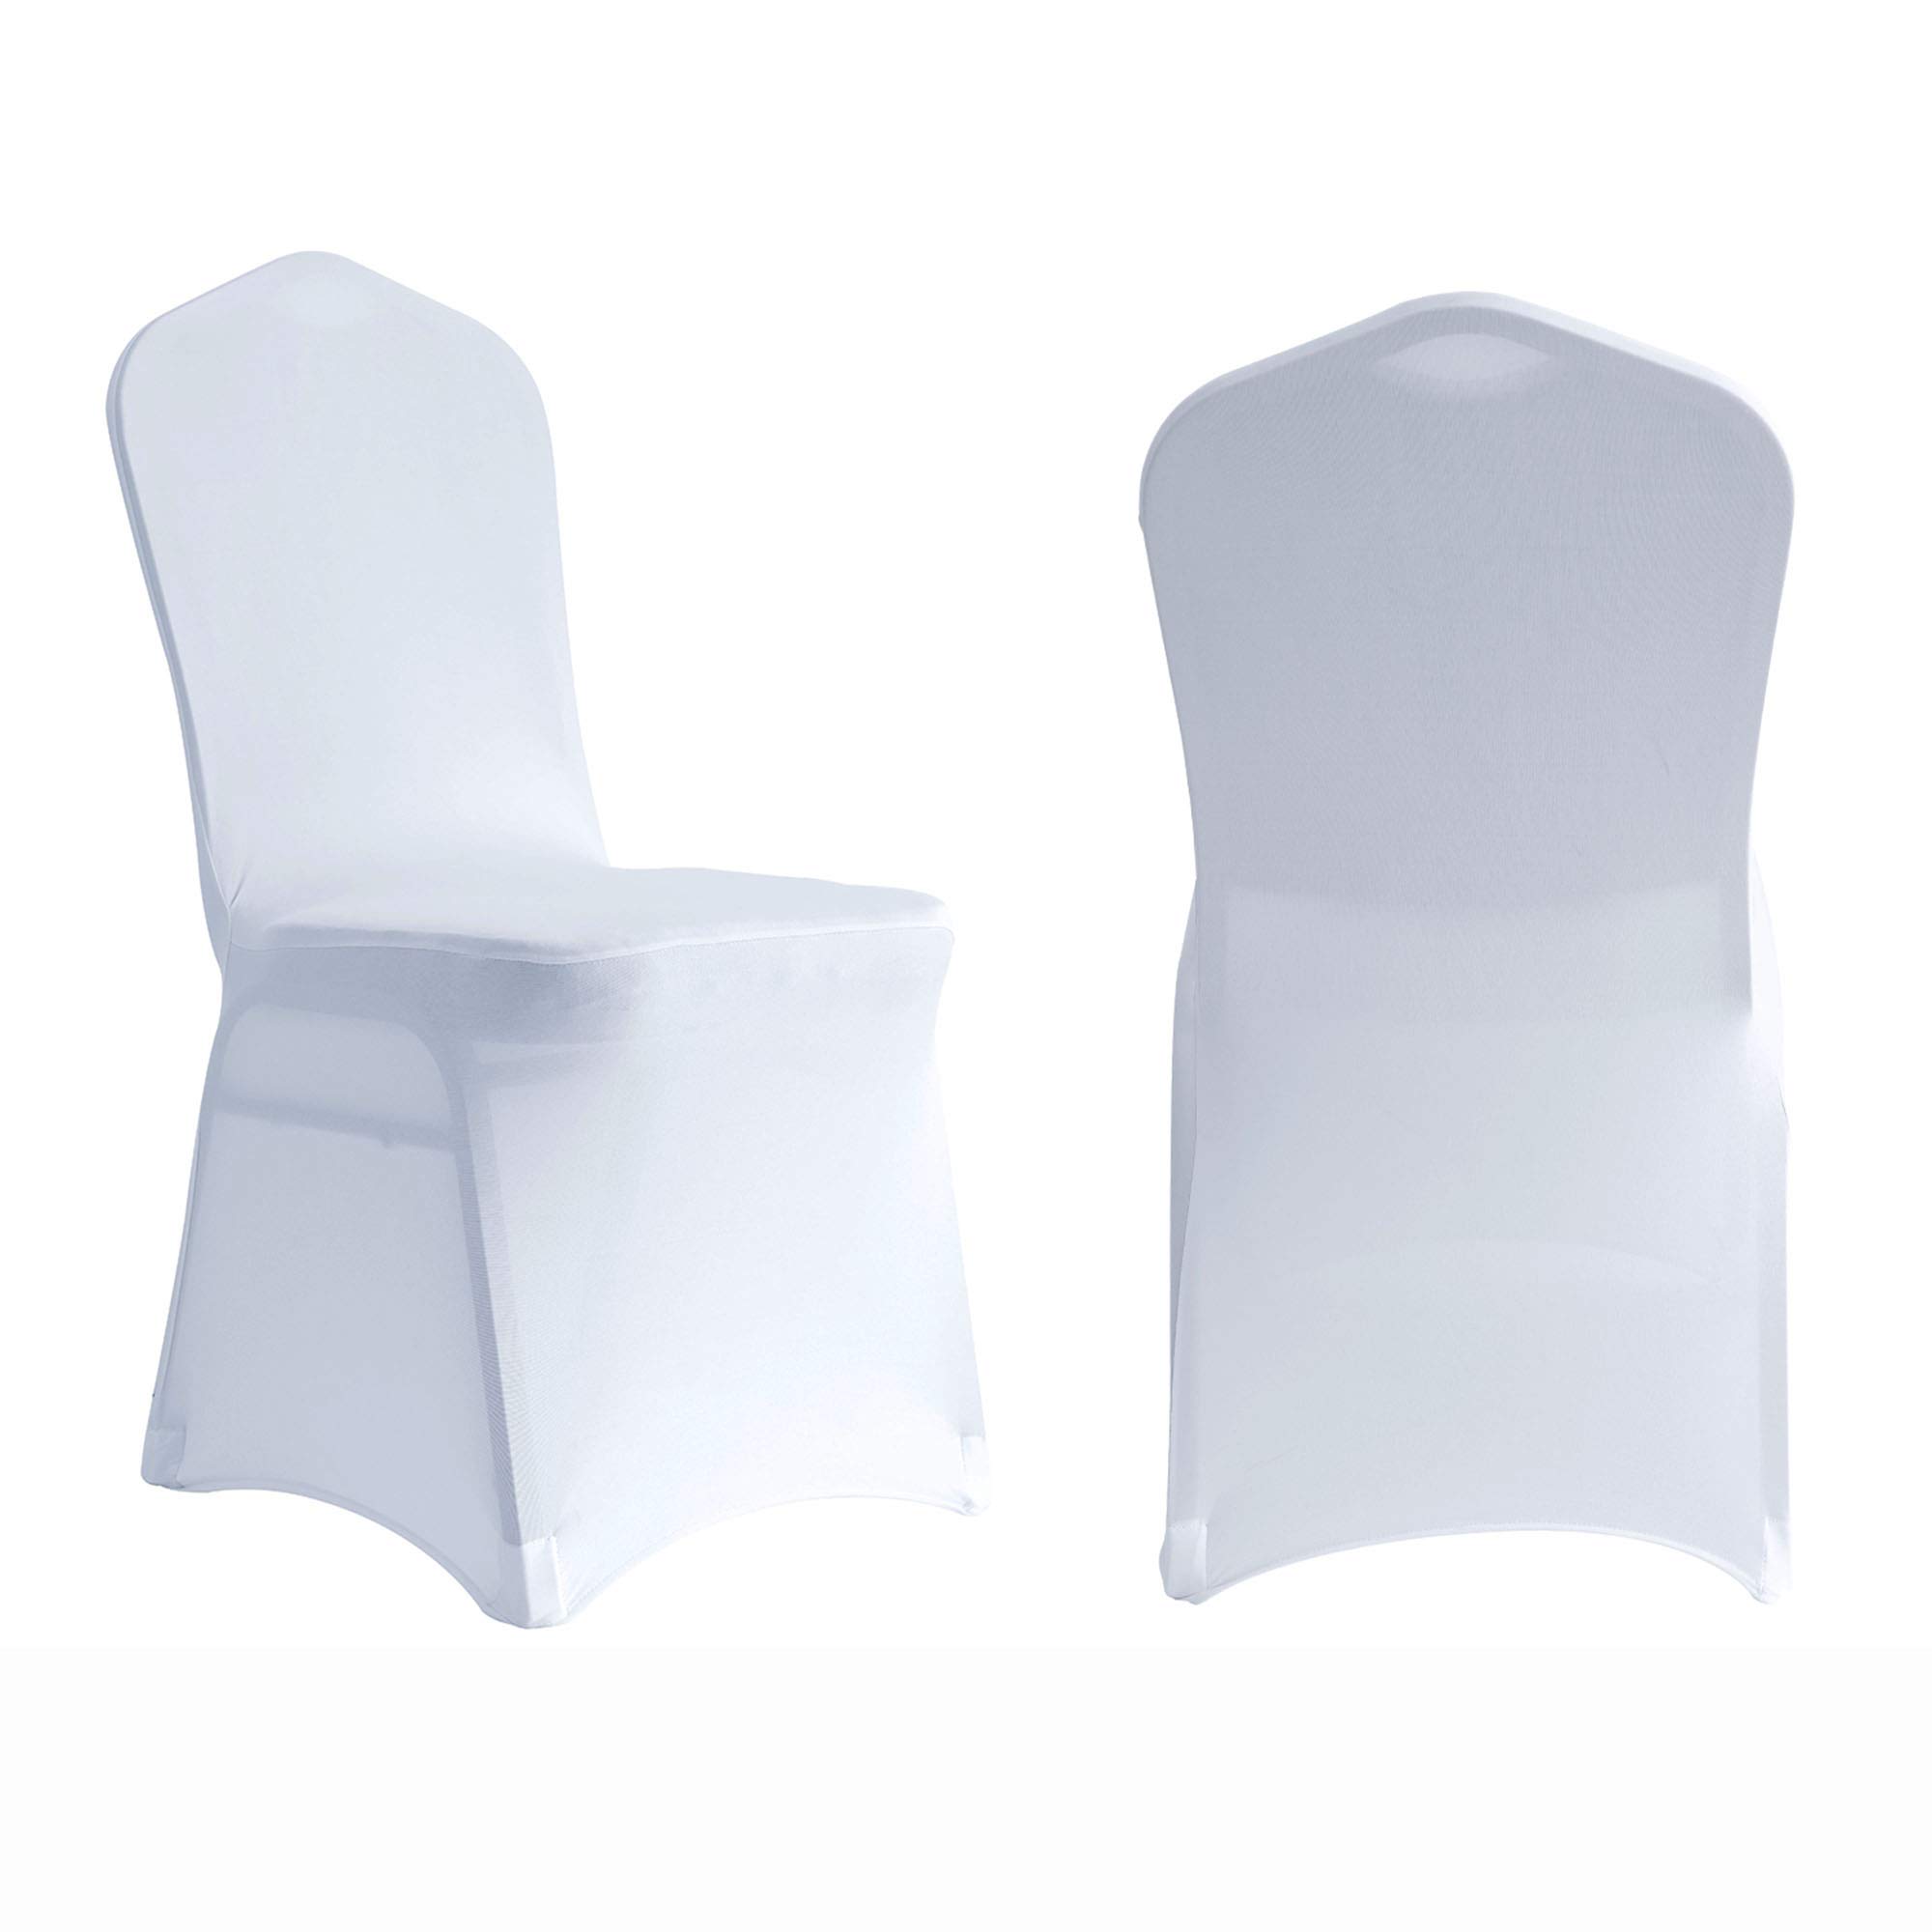 ManMengJi White chair covers, Spandex chair Slipcovers 10 PcS, Banquet chair covers Universal Stretch chair Slipcovers Protector